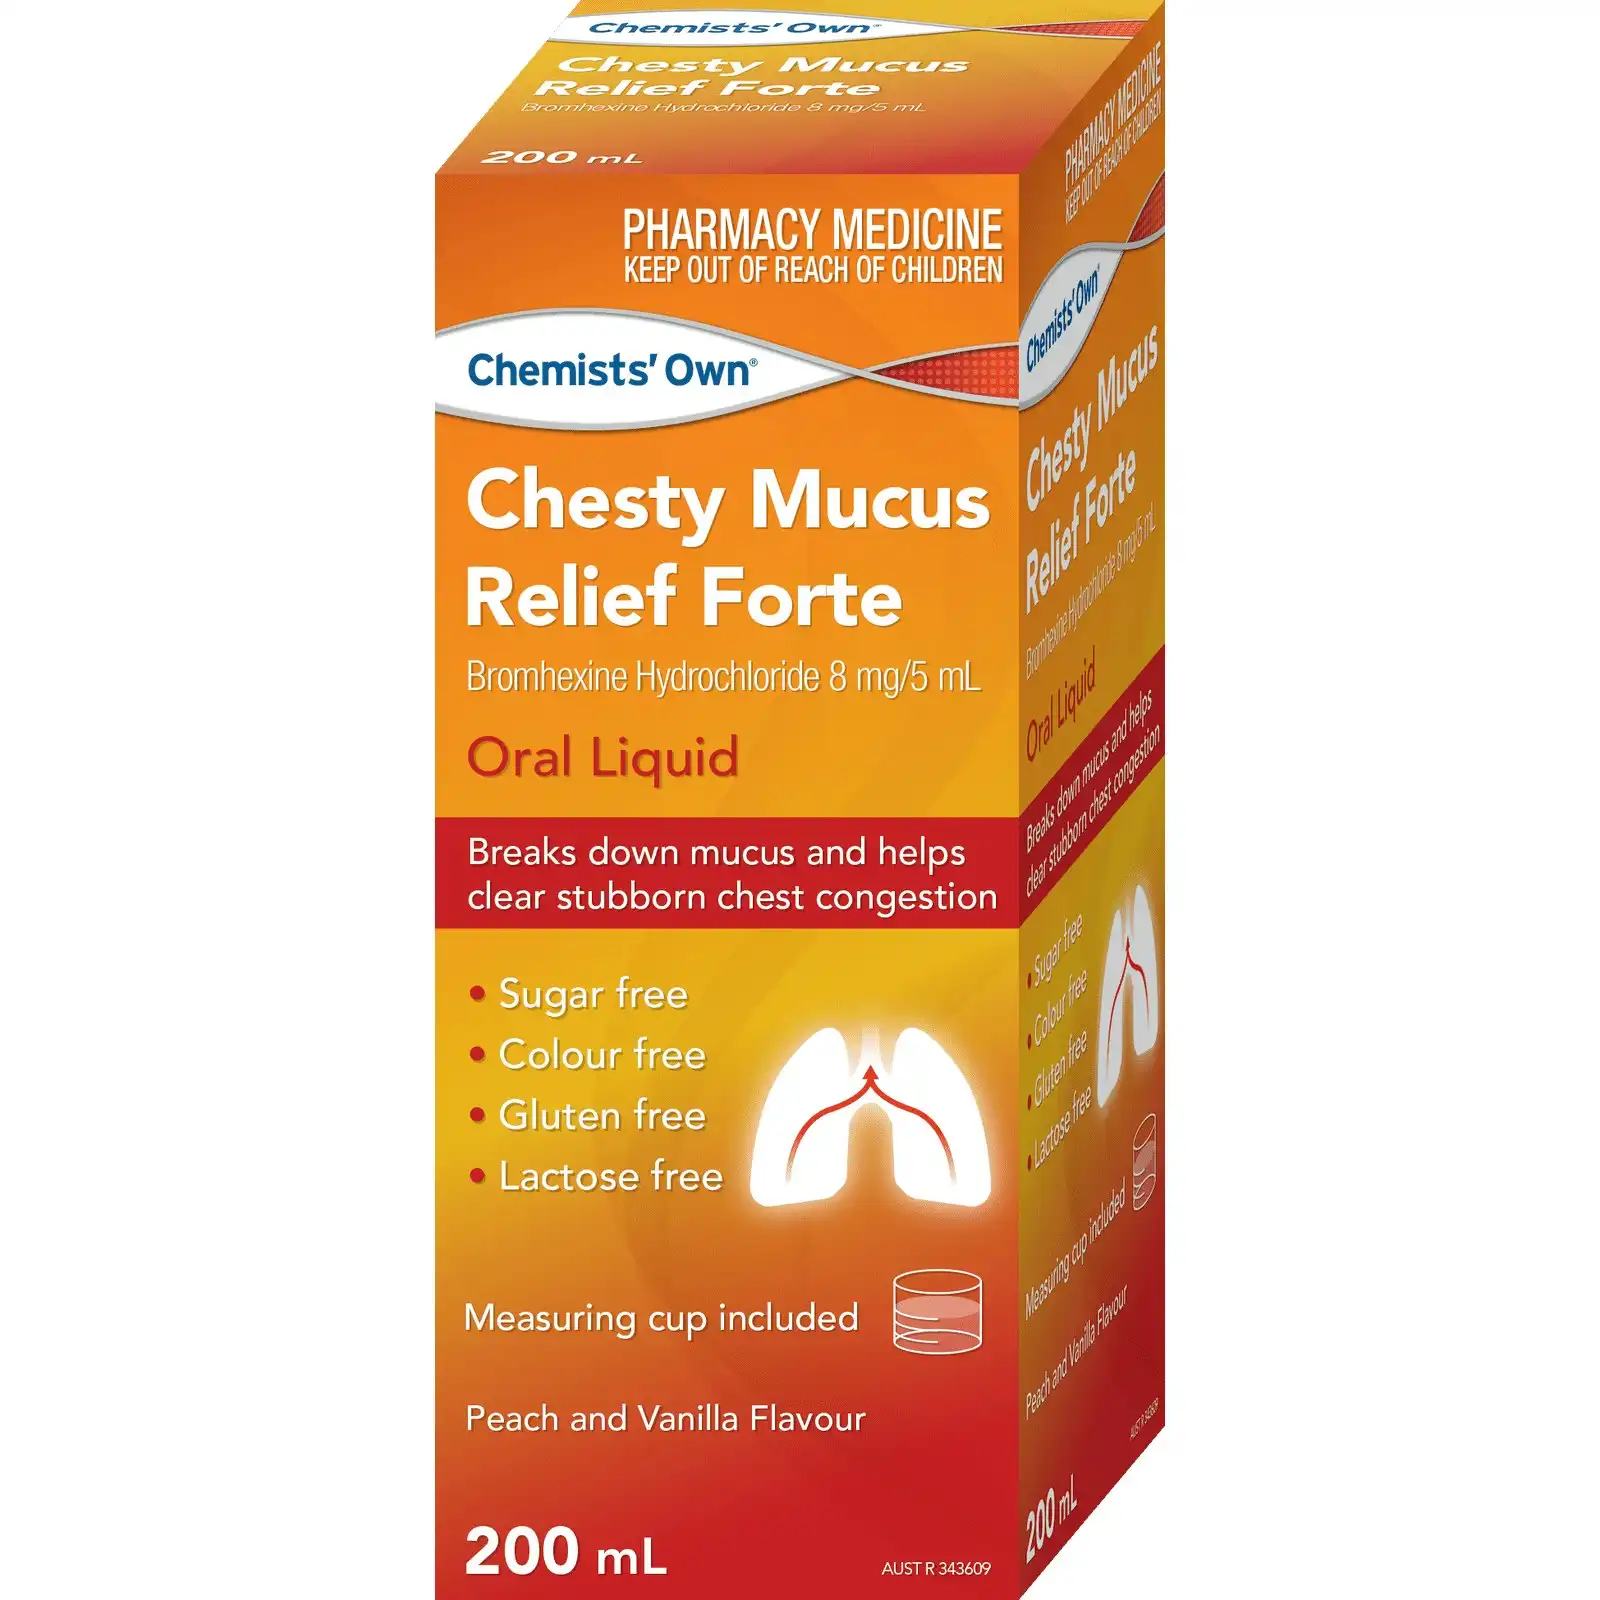 Chemists Own Chesty Mucus Relief Forte Bottle 200mL